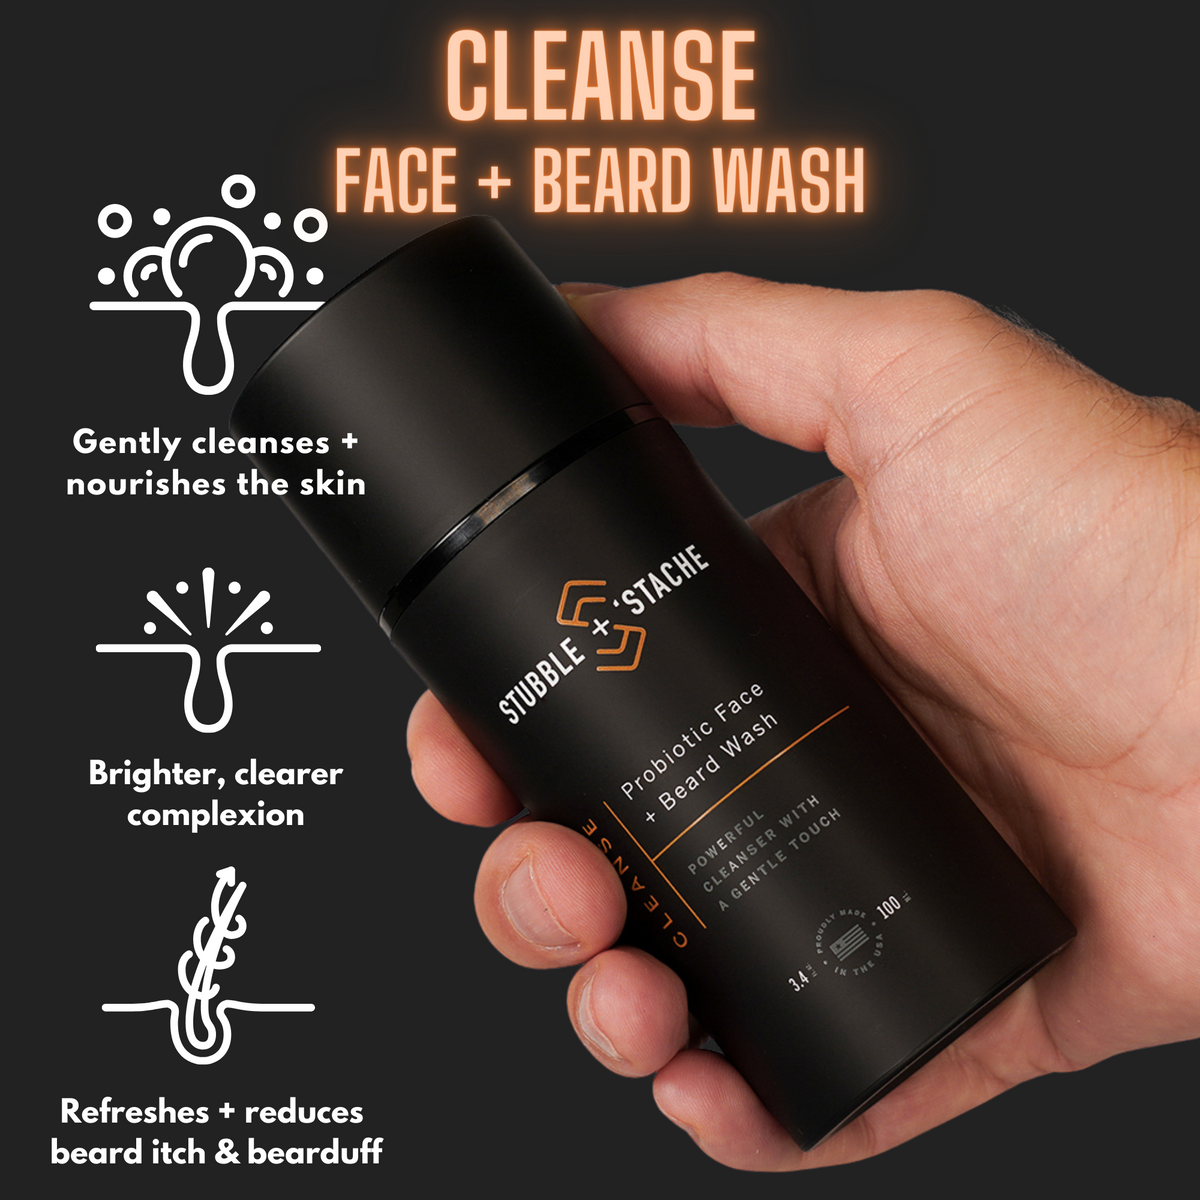 Cleanse: Probiotic Face + Beard Wash